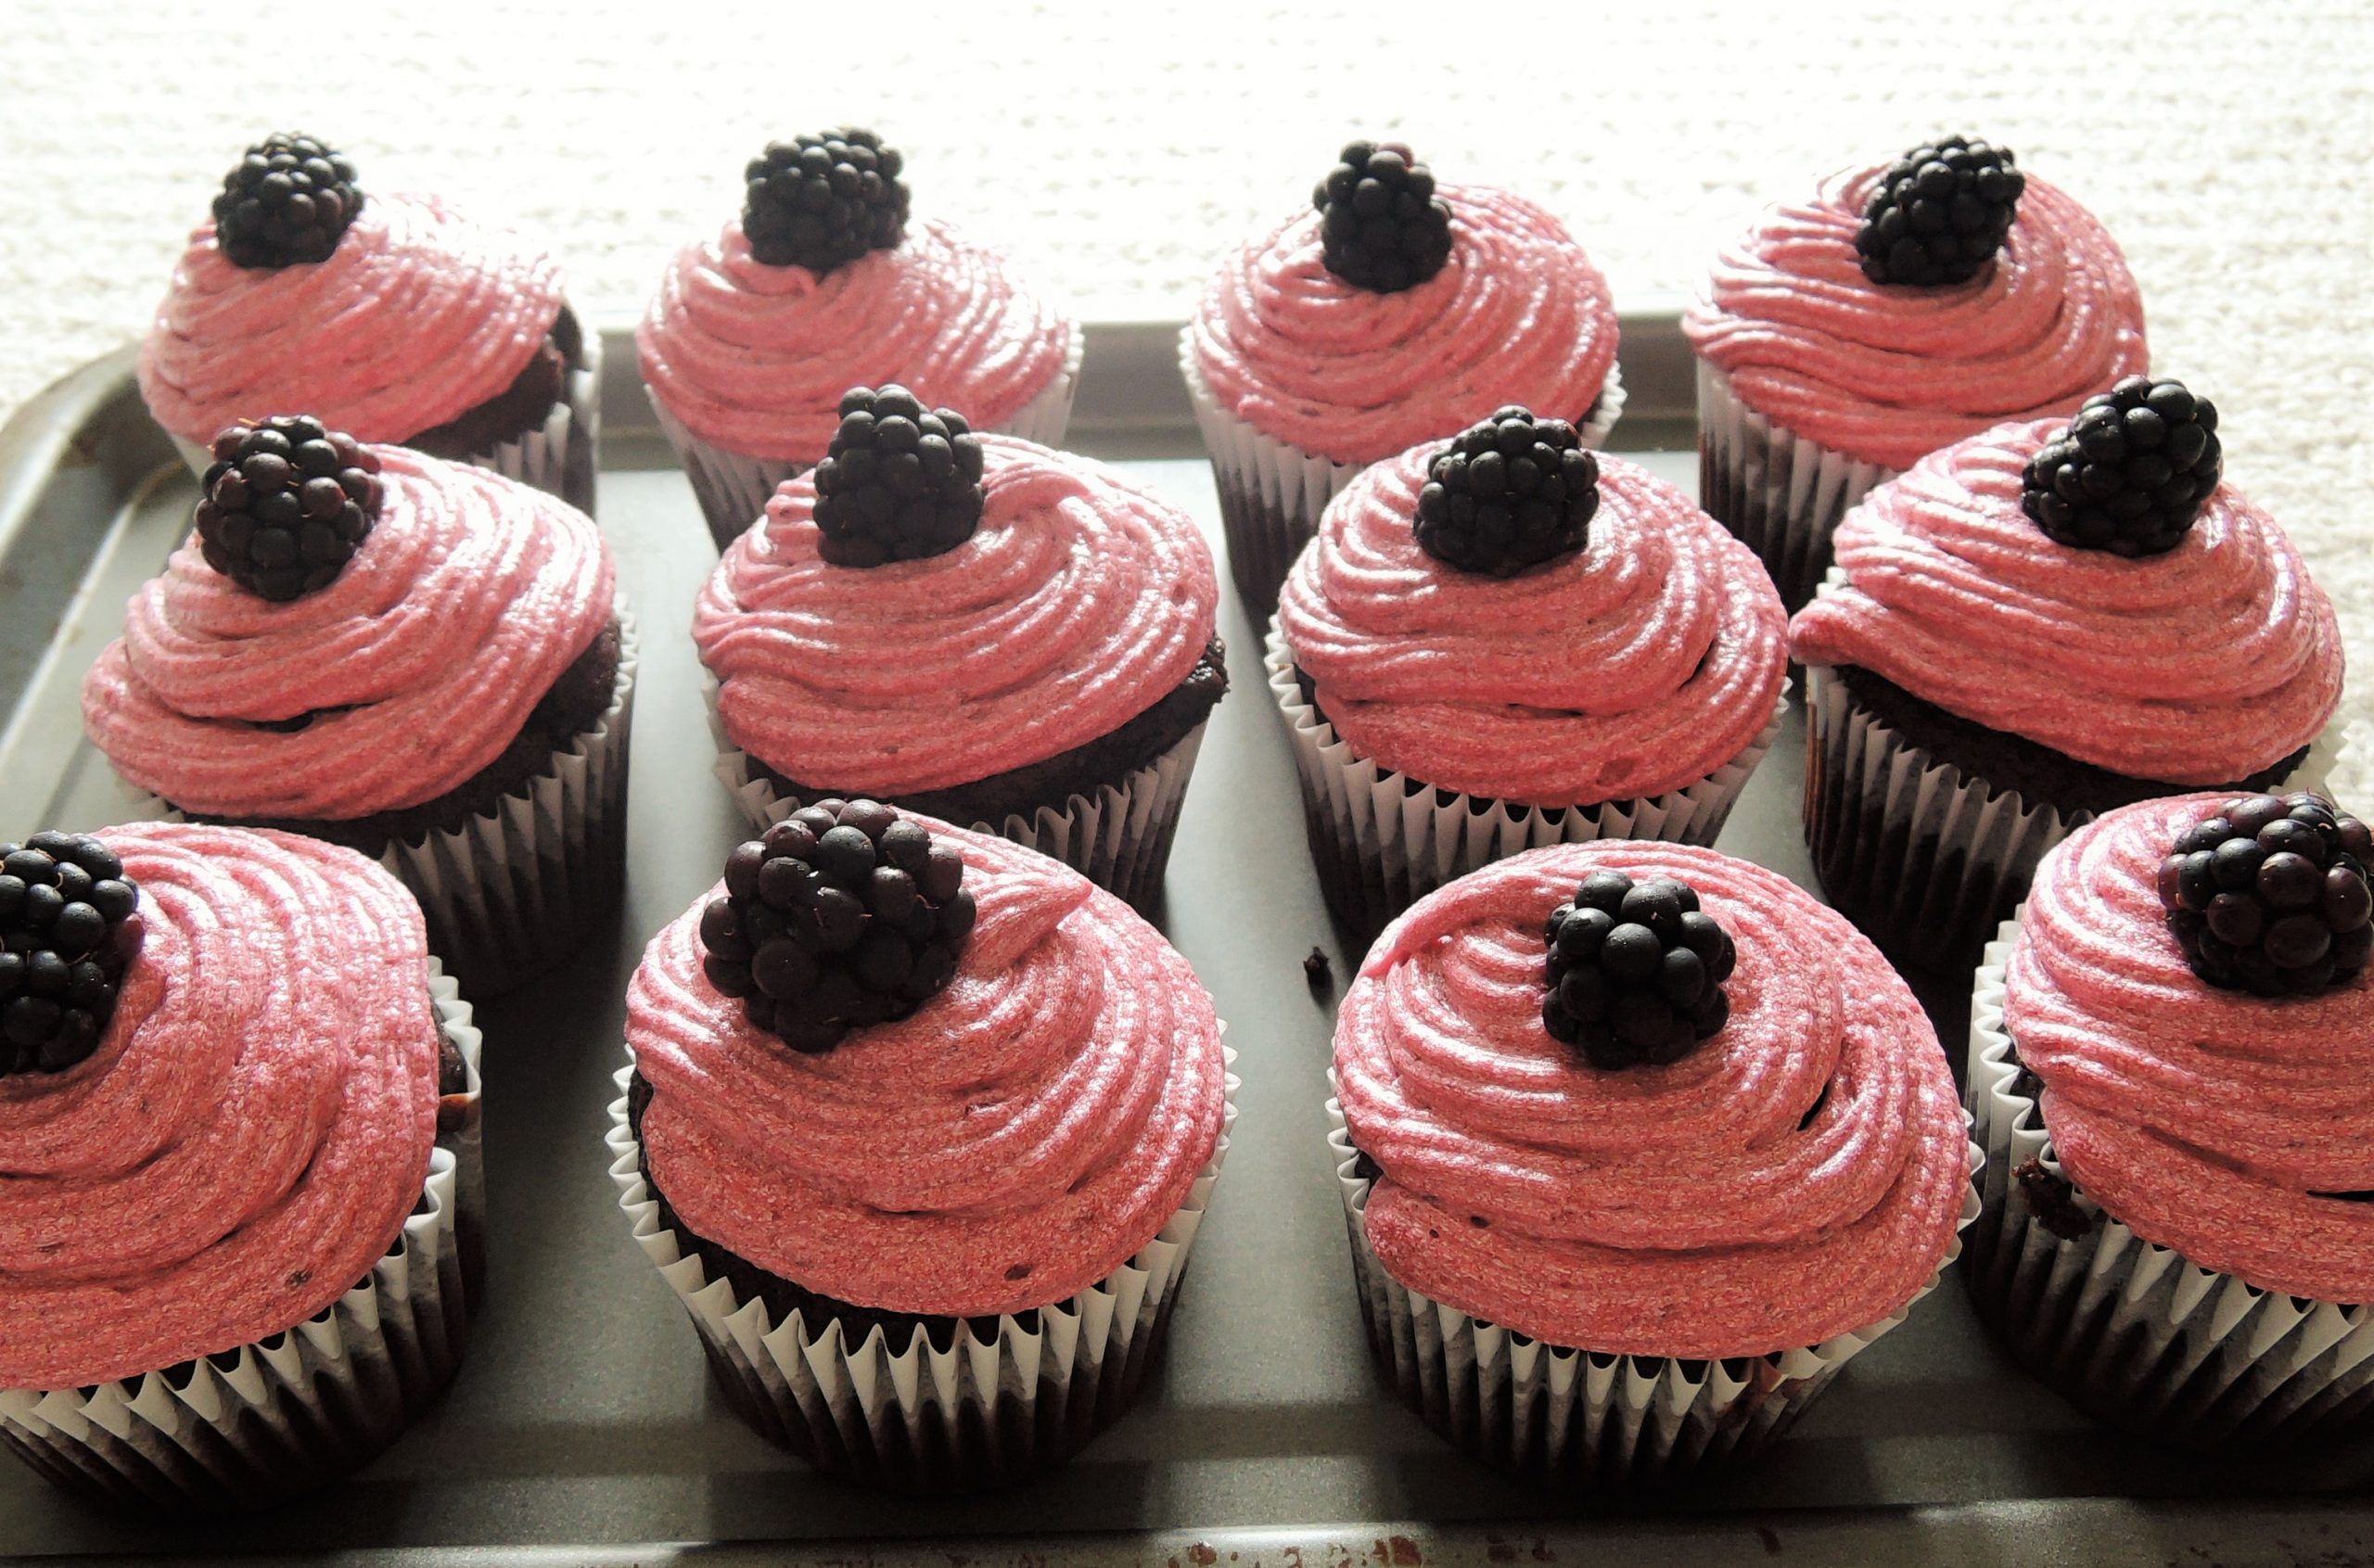 Blackberry and Chocolate Cupcakes